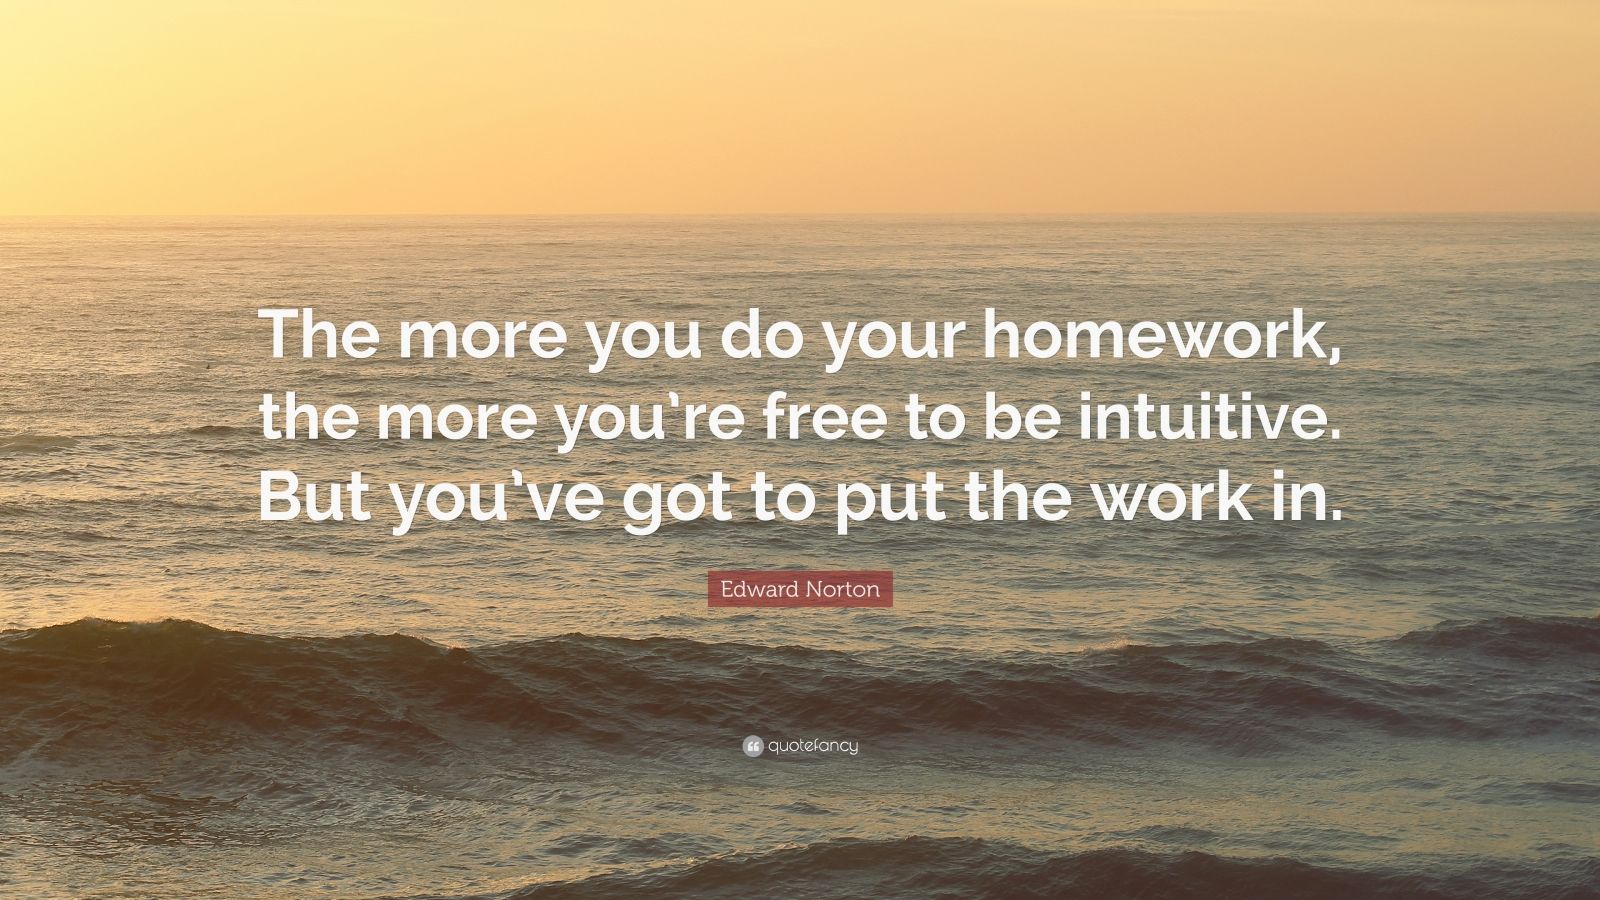 quote about homework being good